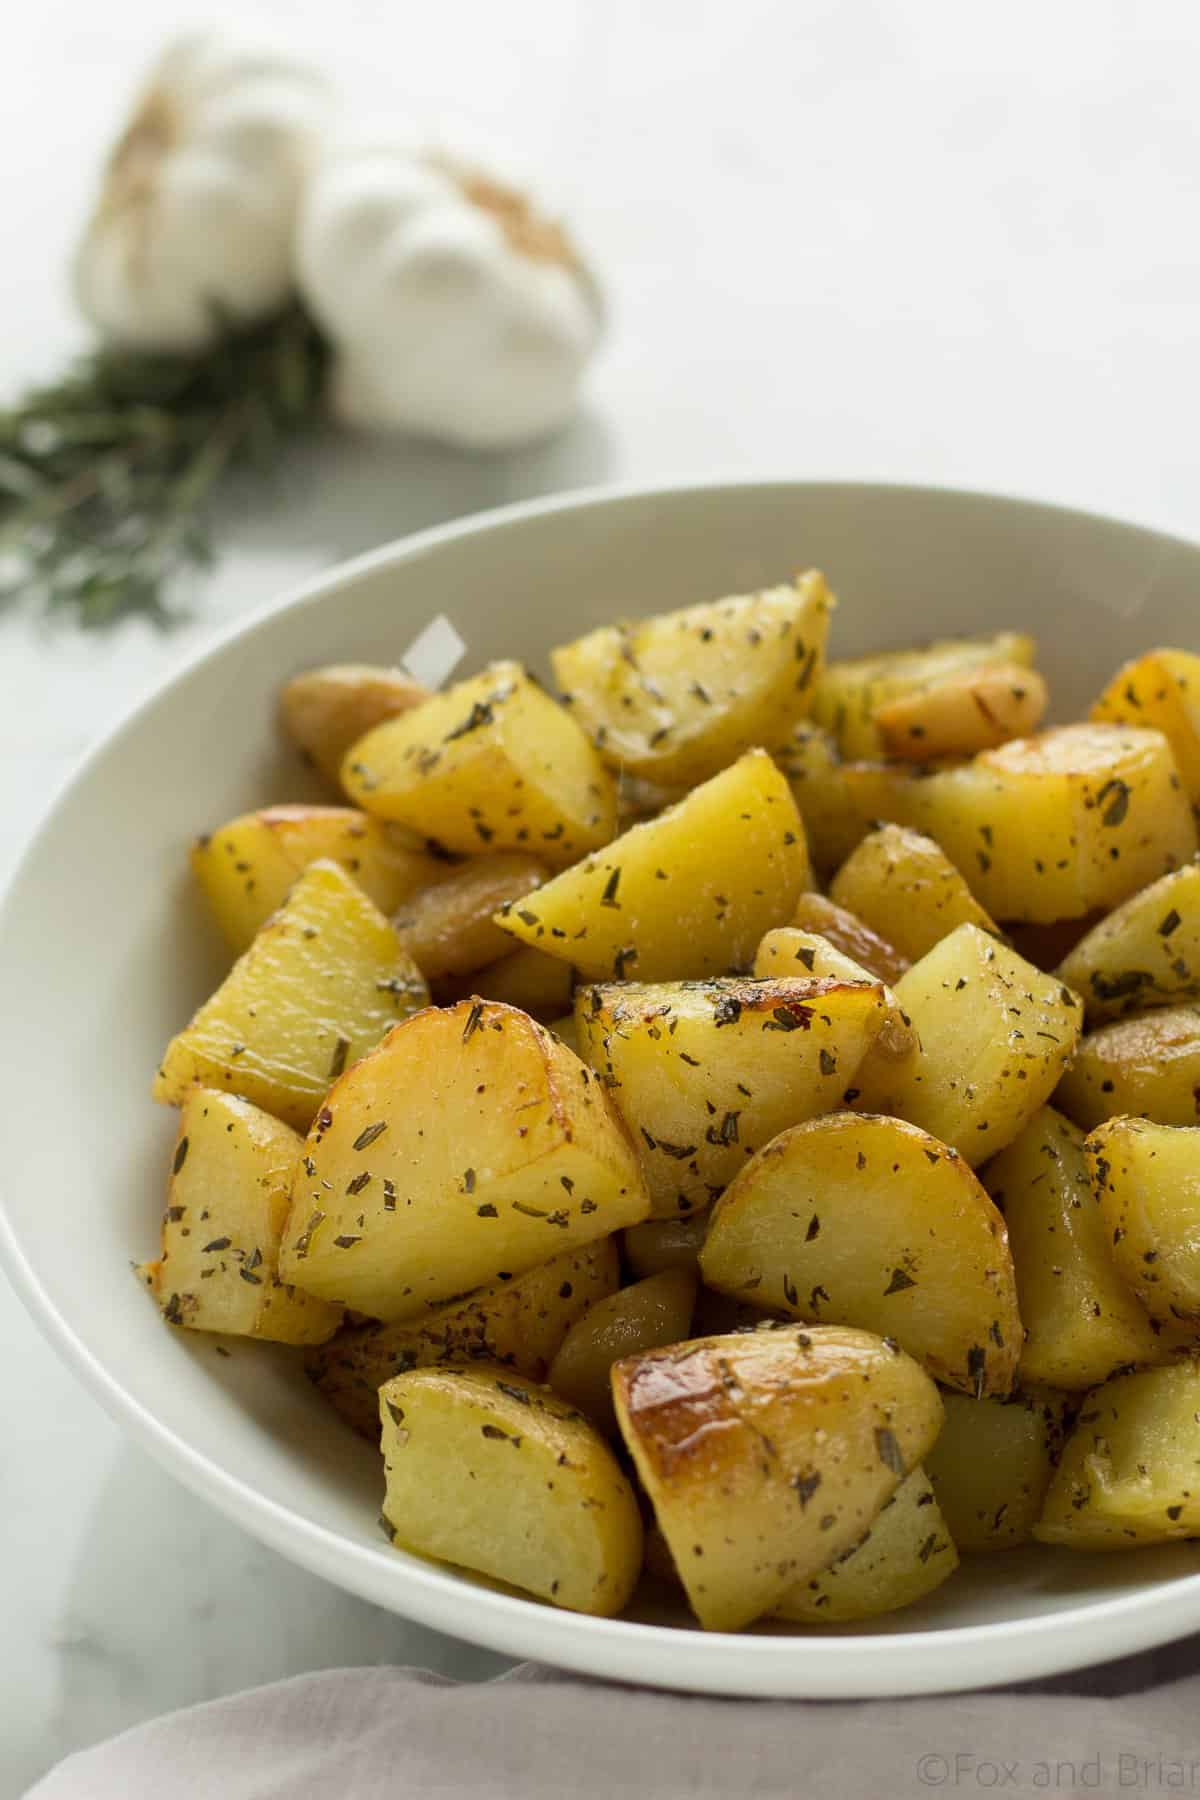 Crispy Roasted Garlic and Rosemary Potatoes. Golden potatoes roasted with garlic and rosemary are your perfect side dish.